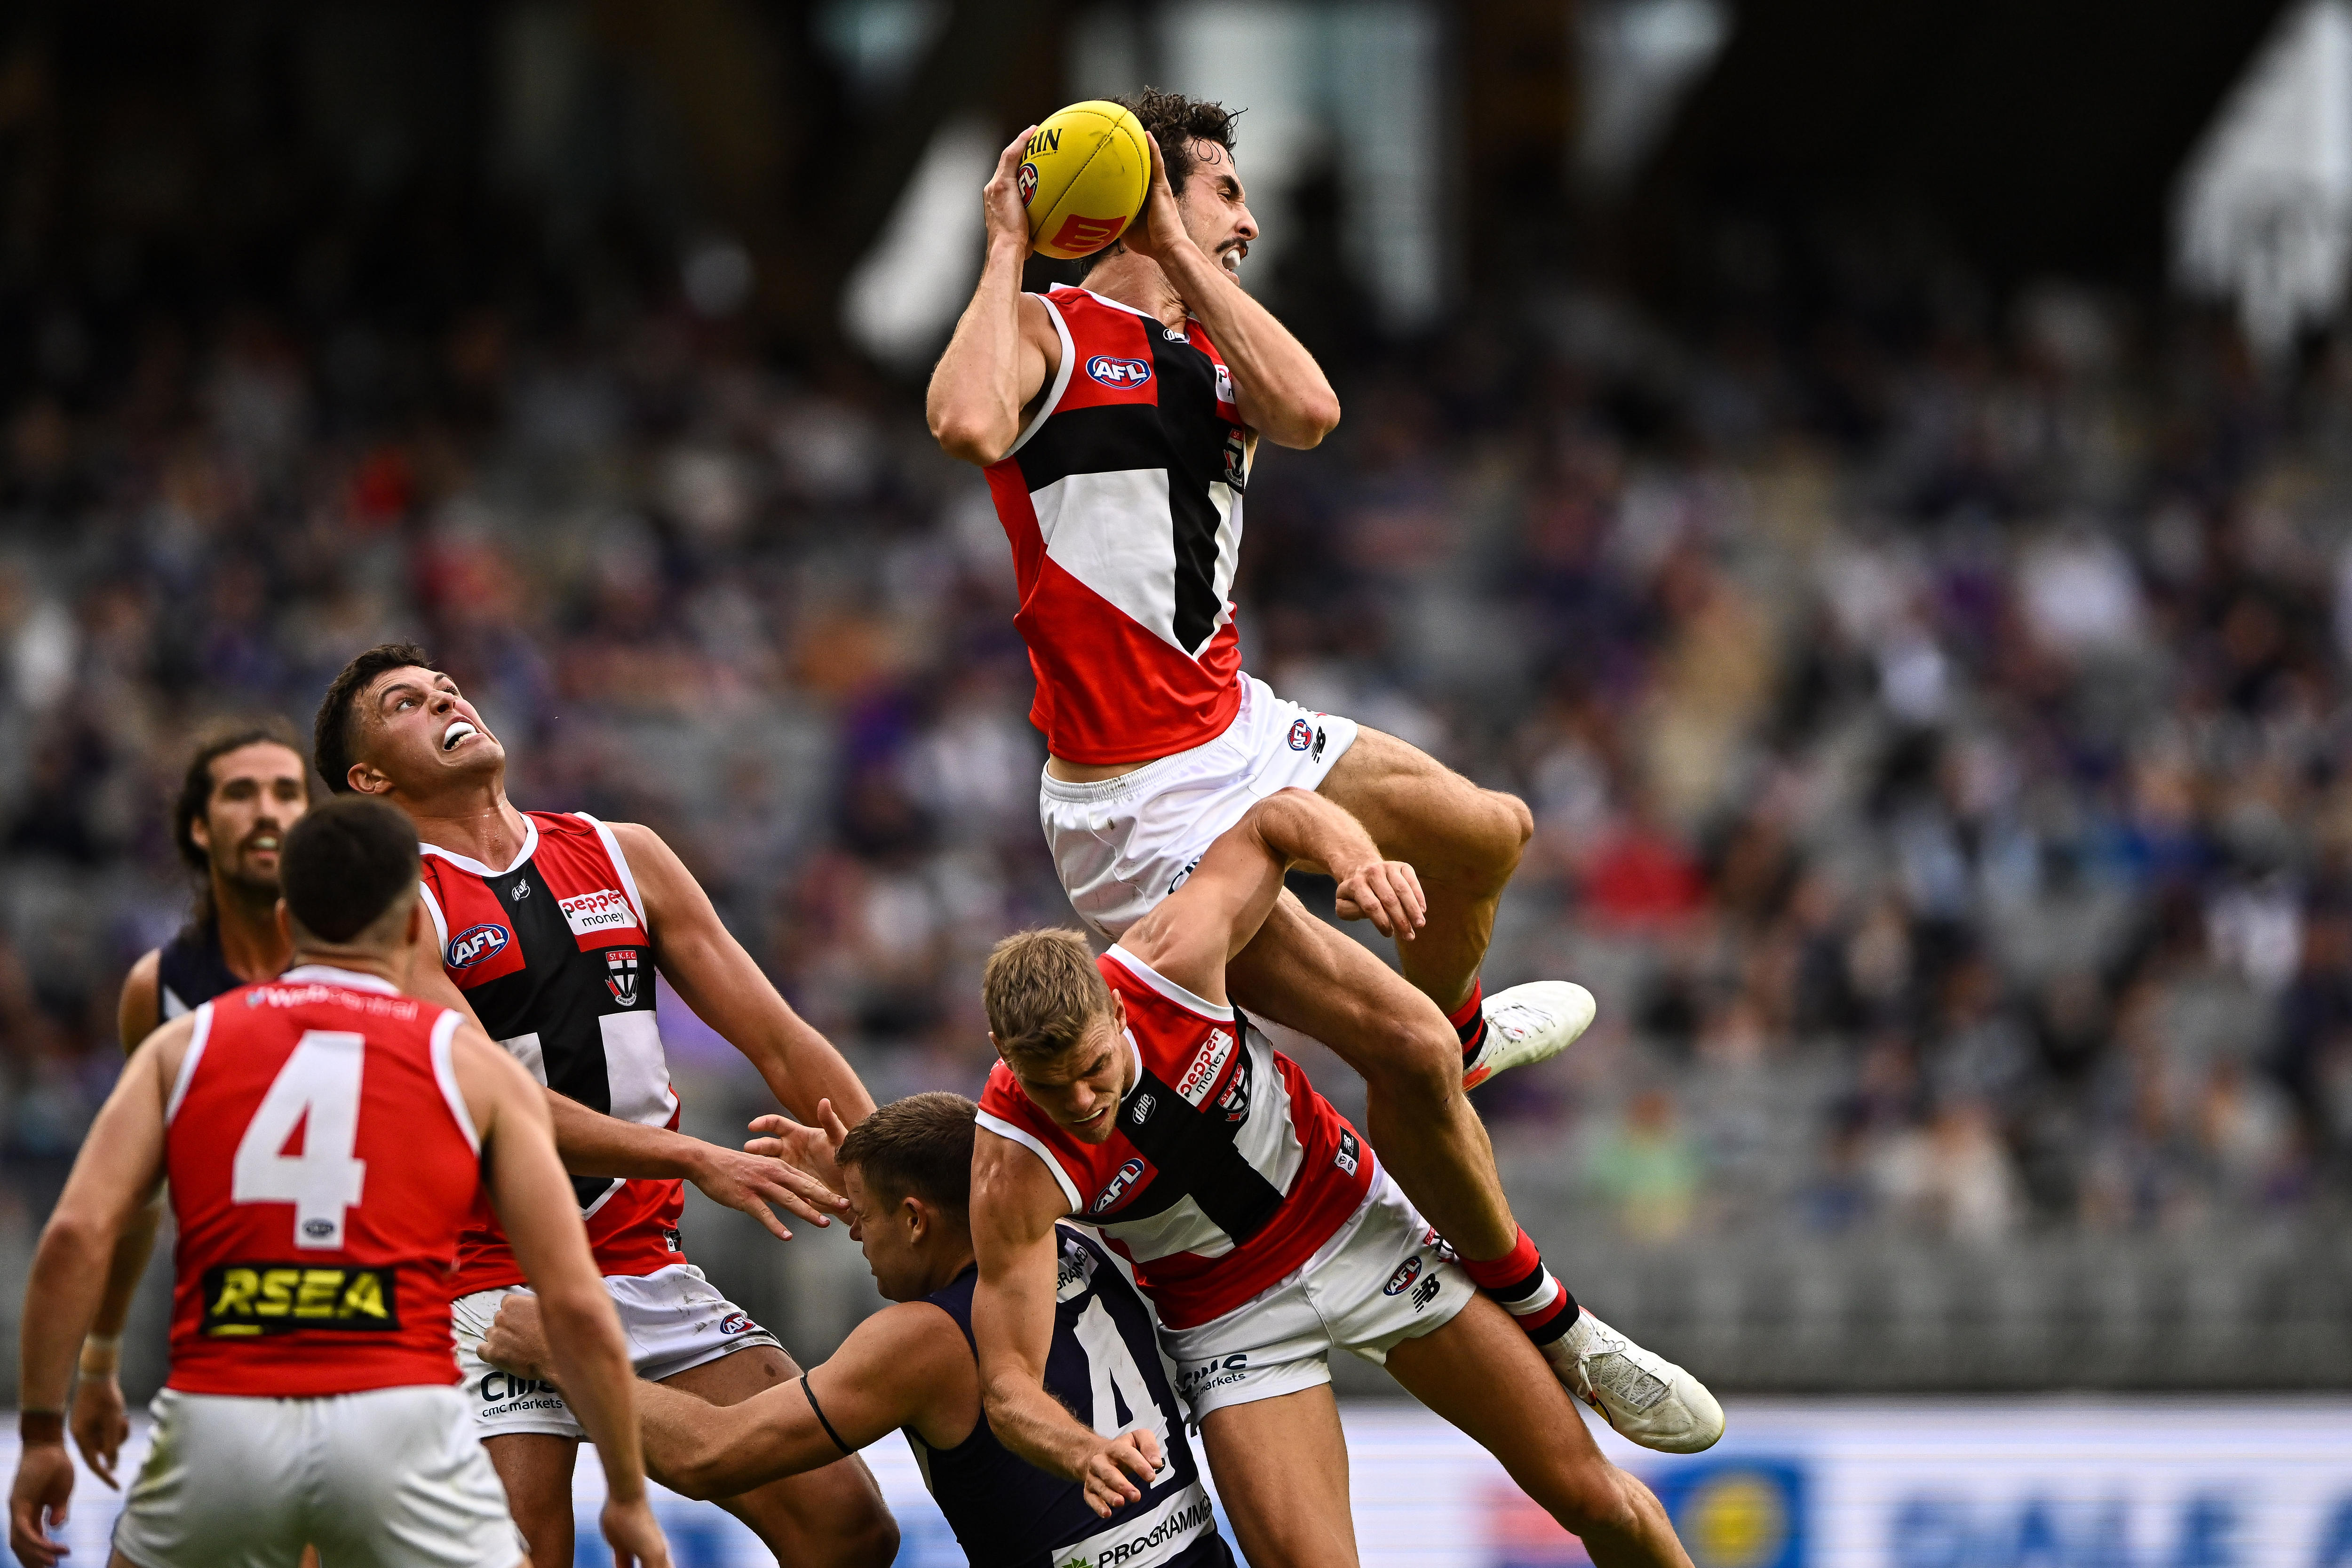 Max King holds the football while perched high atop a pack of players